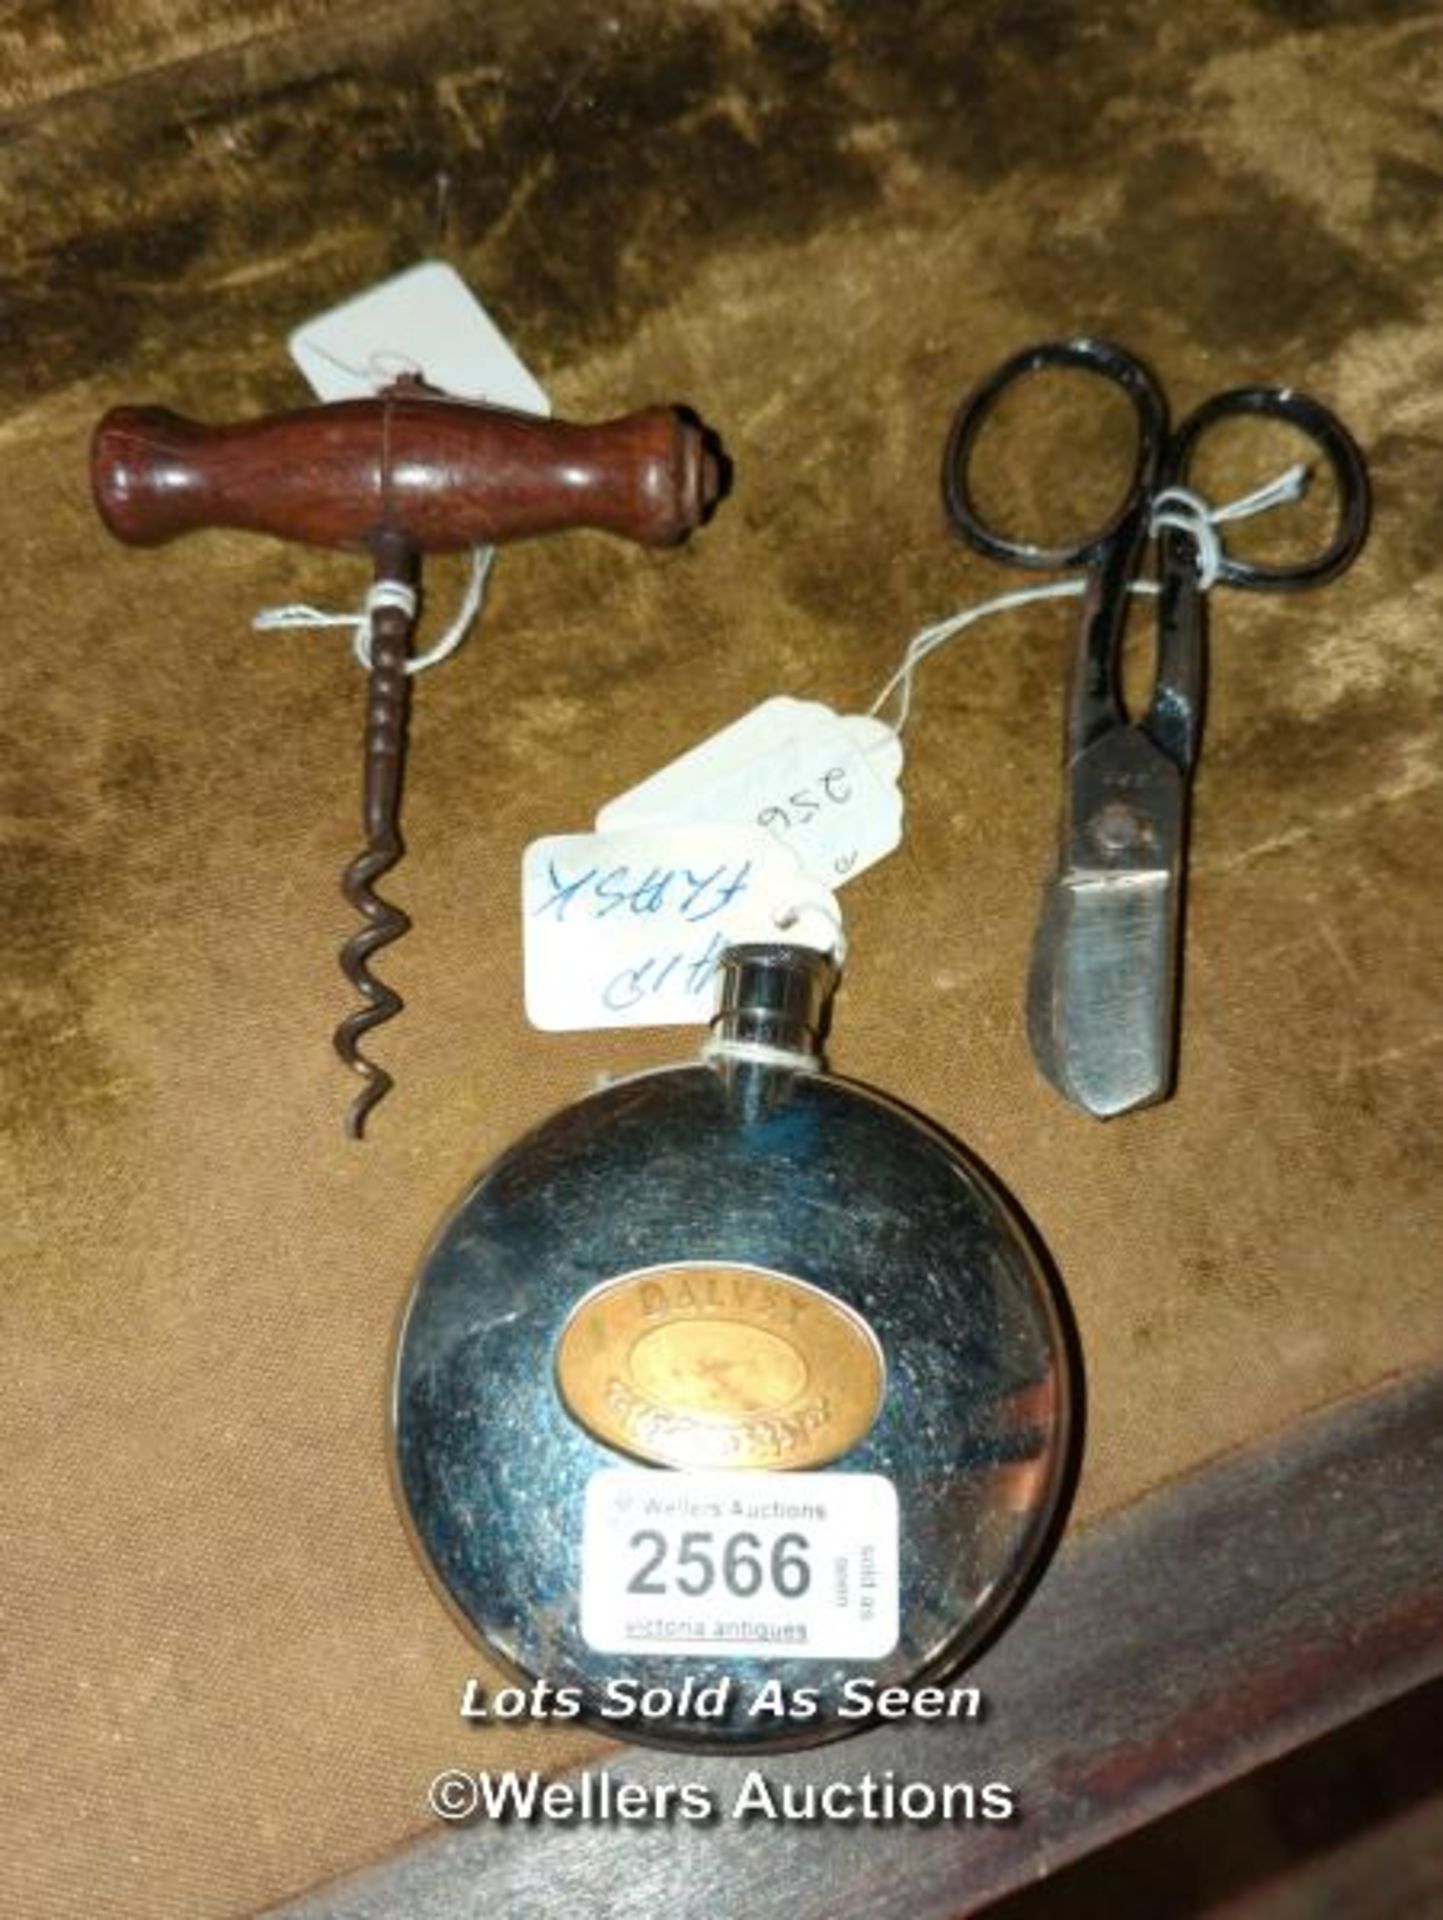 *ANTIQUE CORKSCREW, WIRE CUTTERS, GRANTS OF DALVEY HIP FLASK / LOCATED AT VICTORIA ANTIQUES,